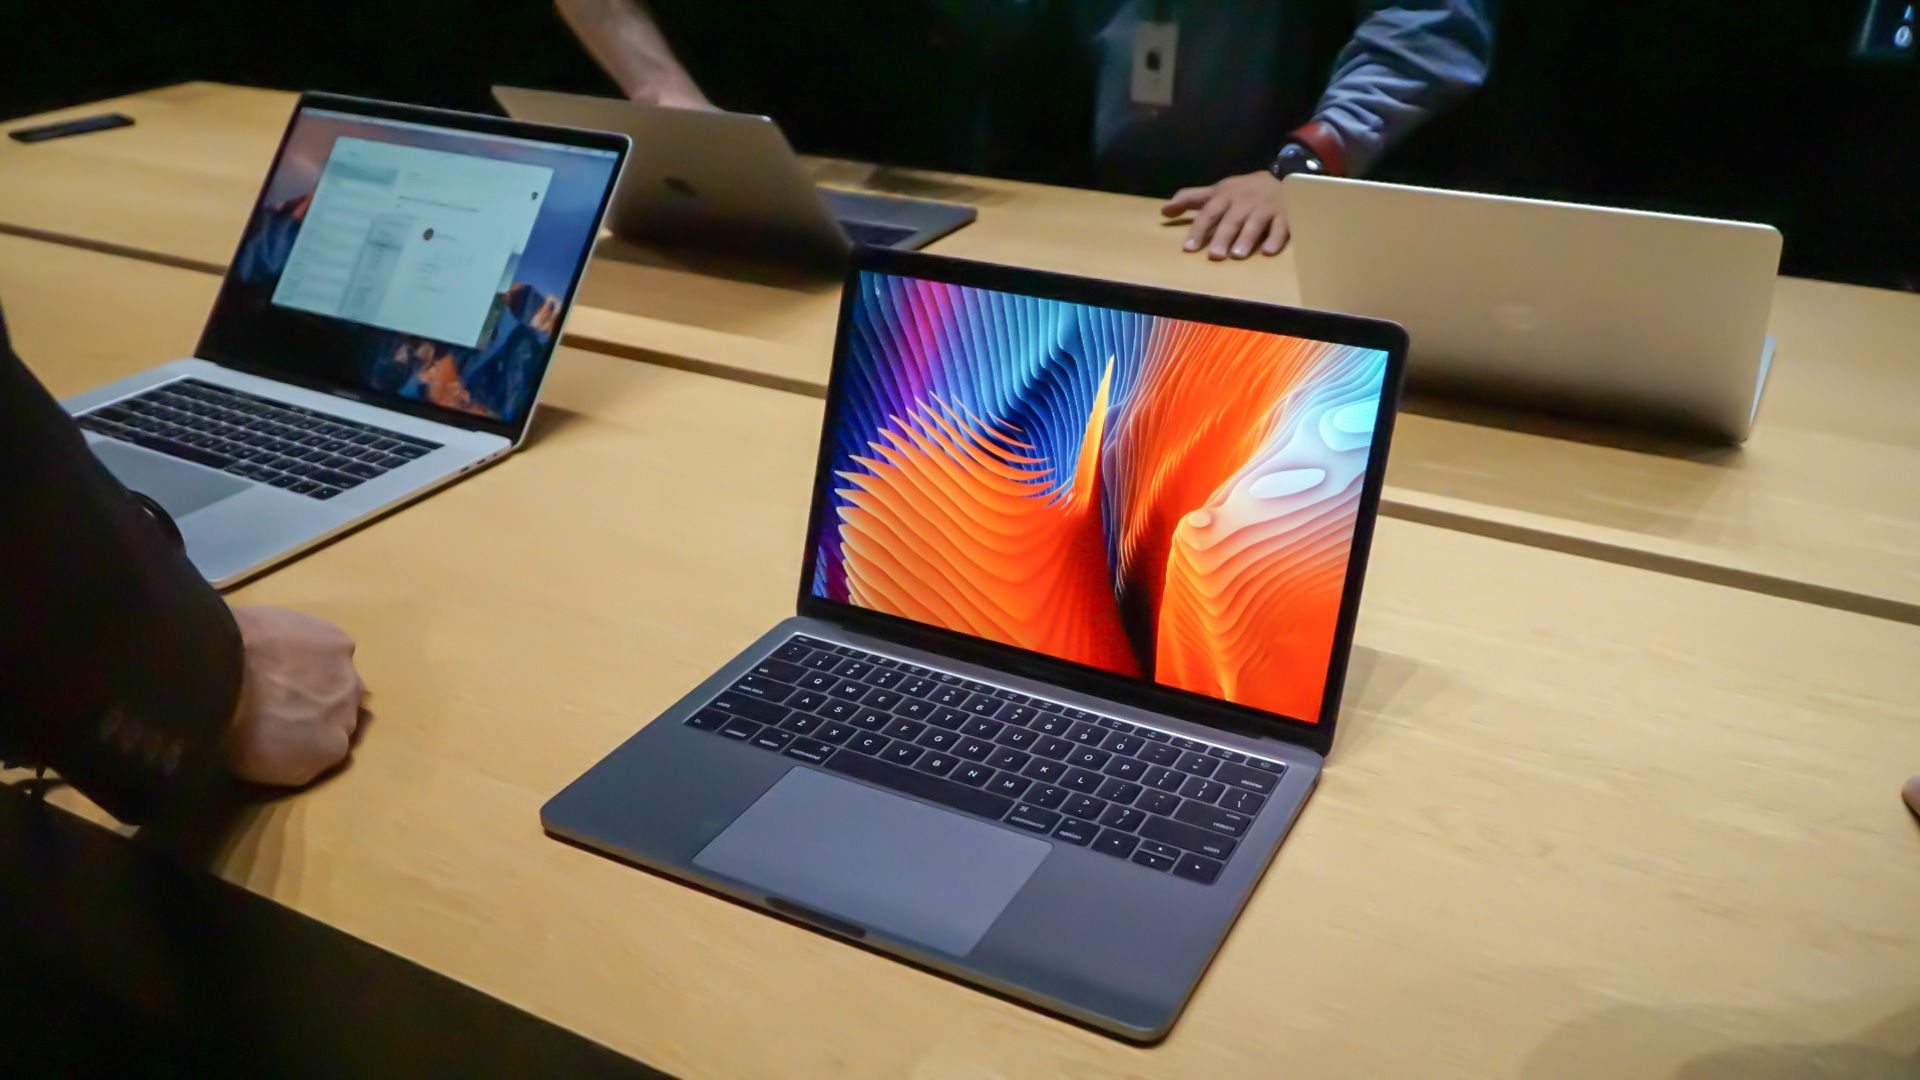 Here's one more sign the 2017 MacBook Pro could be announced next week